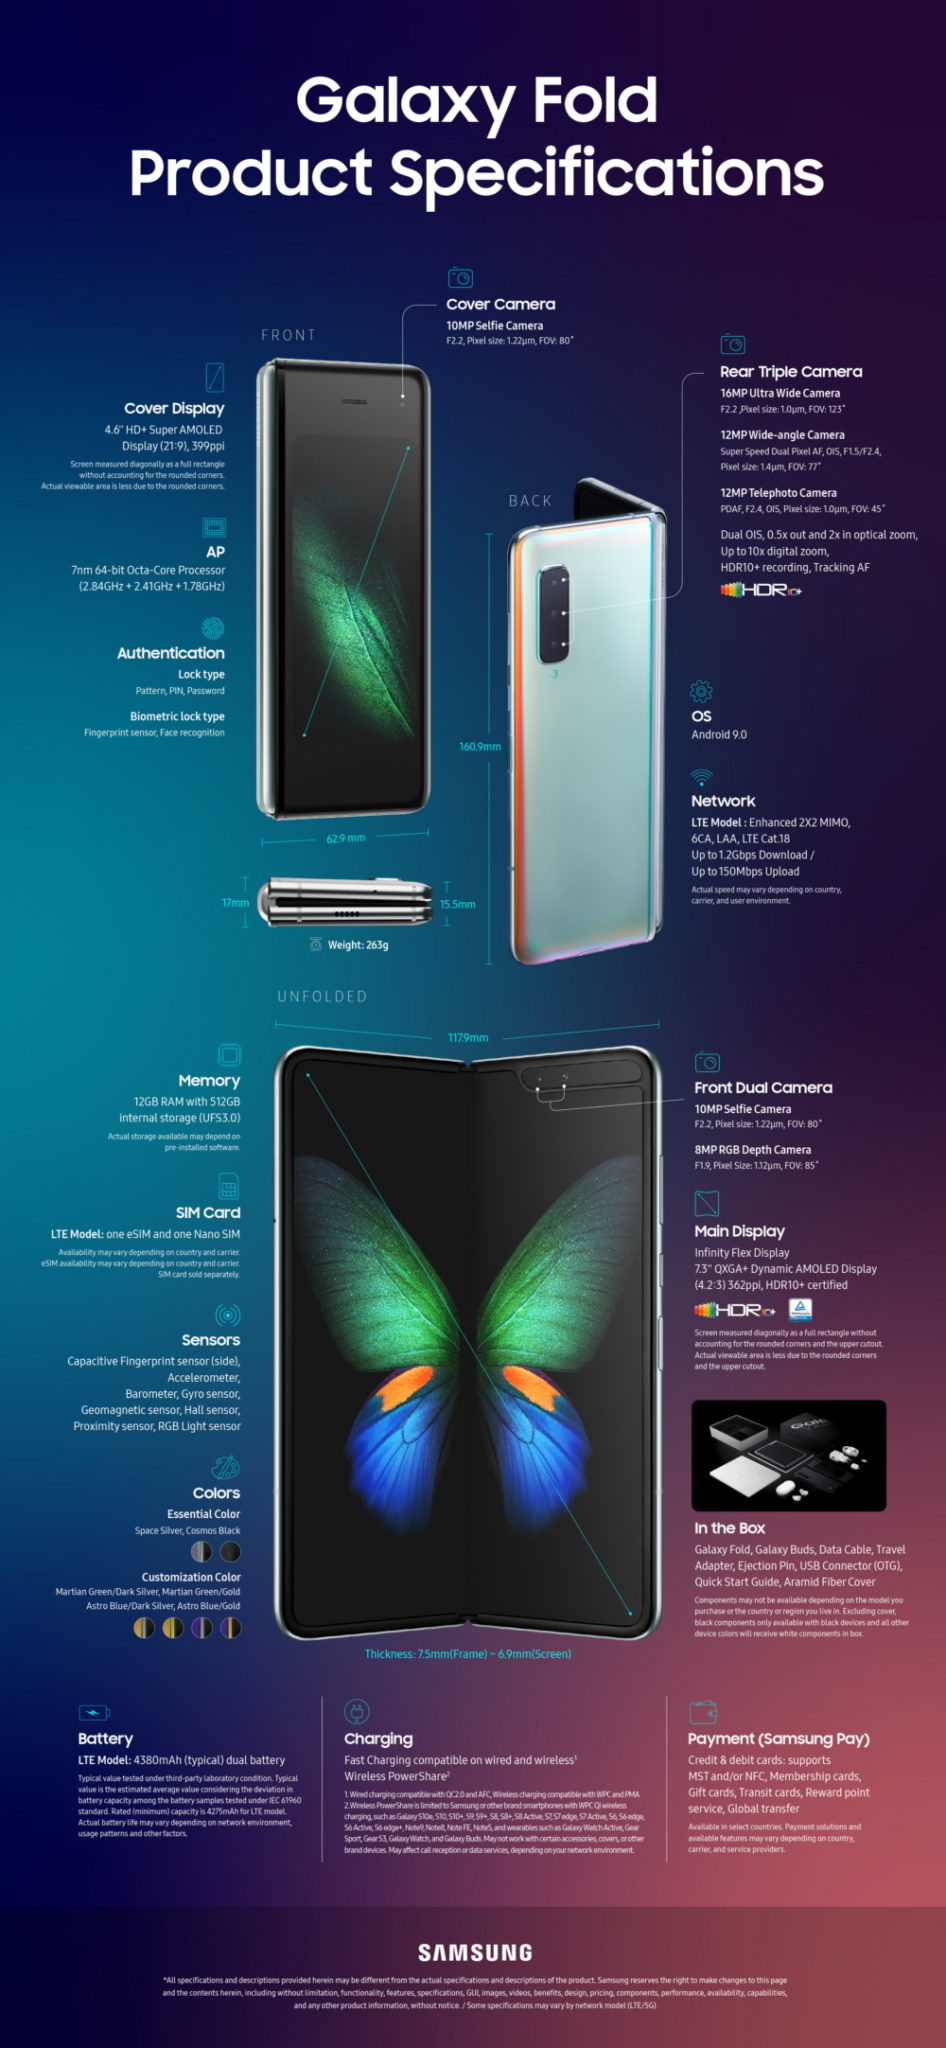 [Infographic] Galaxy Fold: The Technology Behind a Whole New Smartphone Category